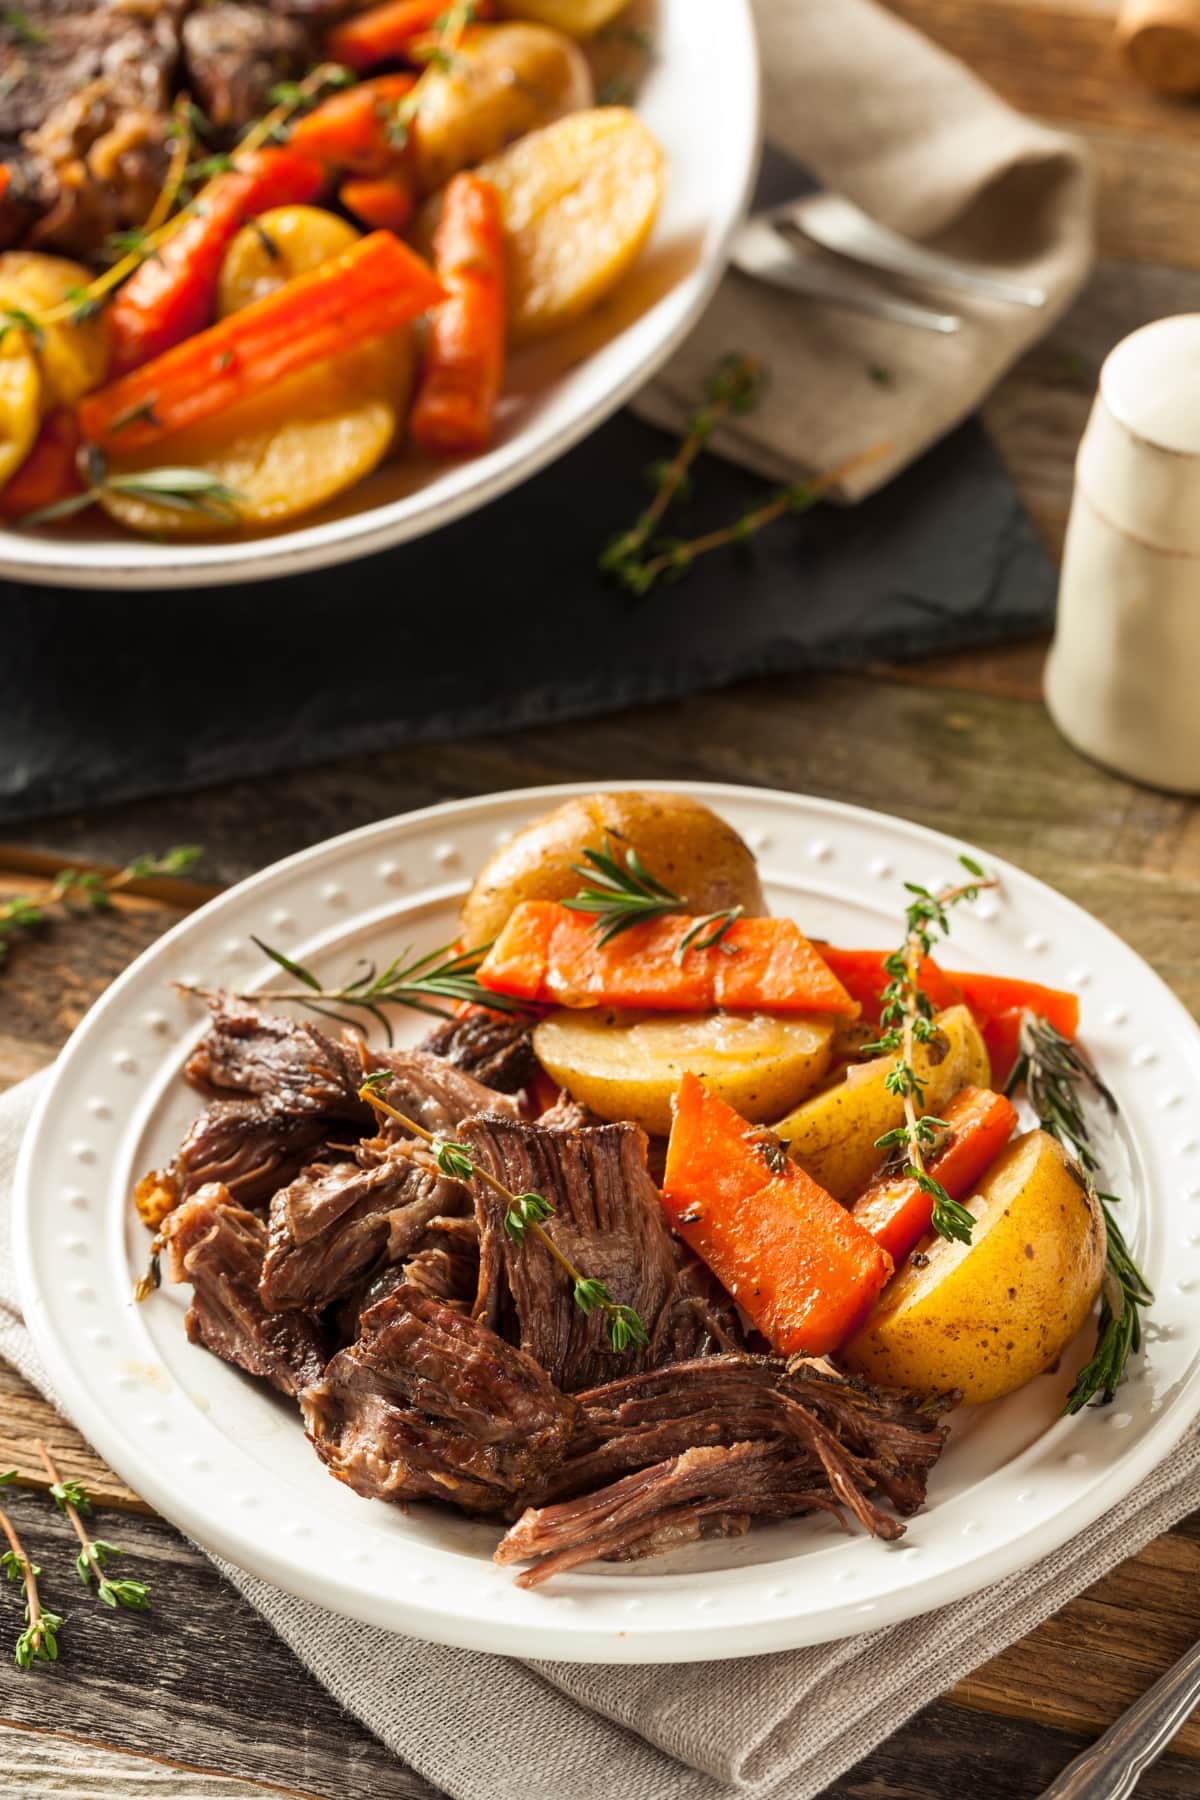 Homemade Classic Pot Roast with Carrots, Potatoes and Beef